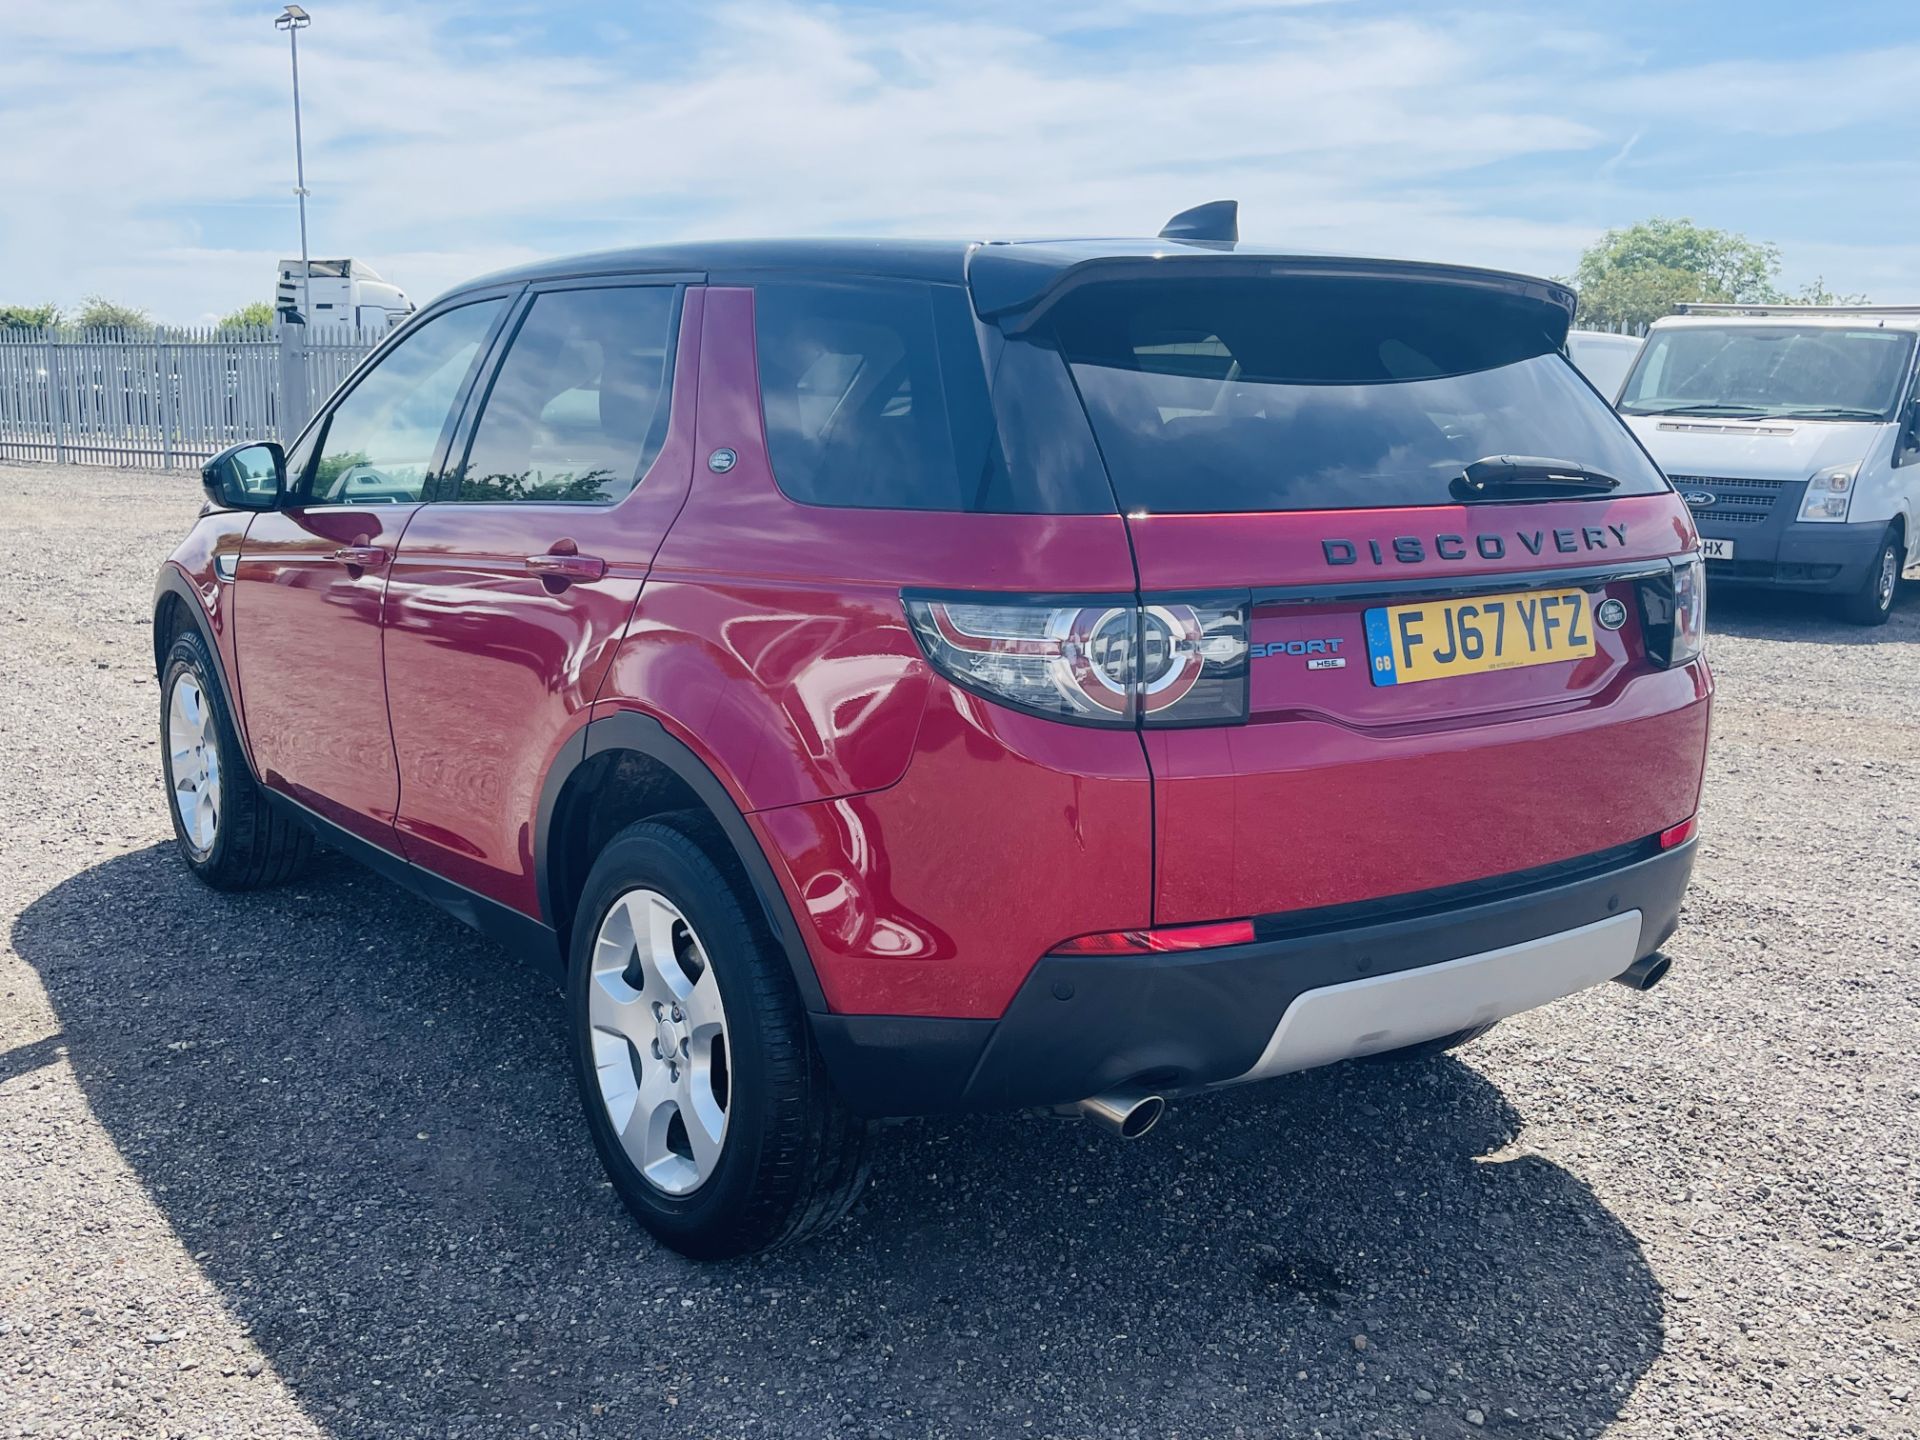 Land Rover Discovery Sport HSE 2.0 ED4 2017 '67 Reg' Sat Nav - Panoramic Glass Roof - ULEZ Compliant - Image 9 of 33